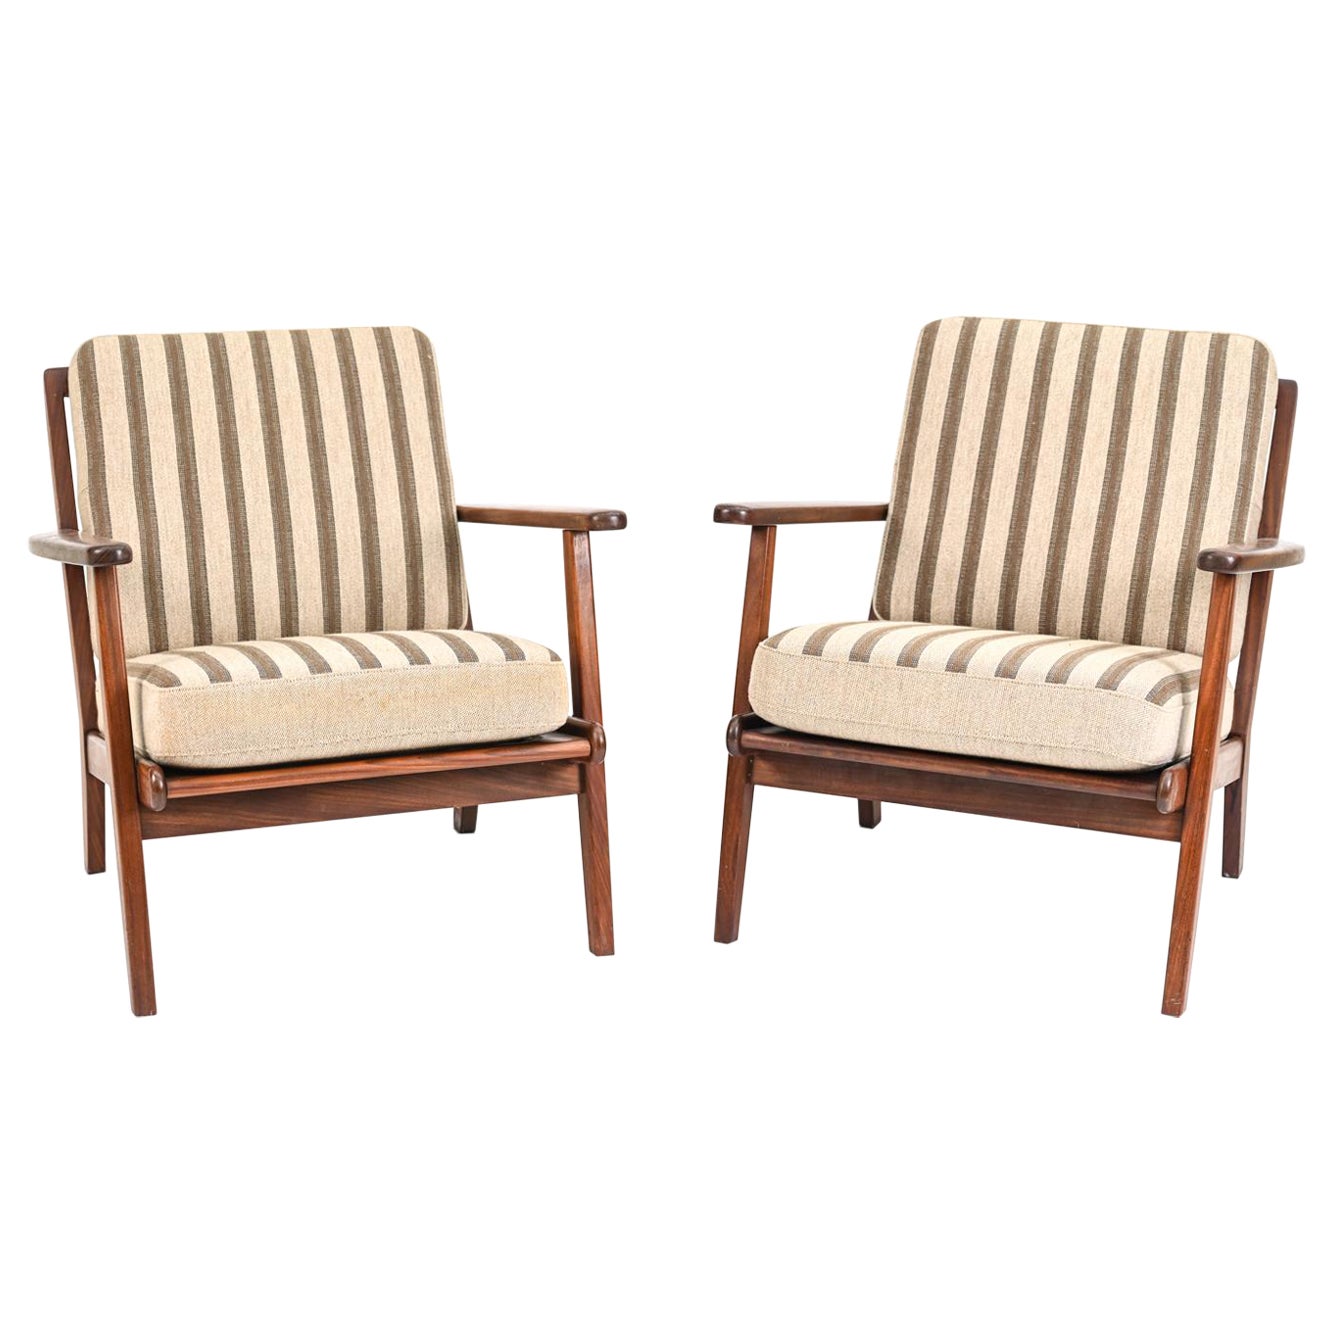 Pair of Danish Lounge Chairs in the Manner of Hans Wegner for GETAMA